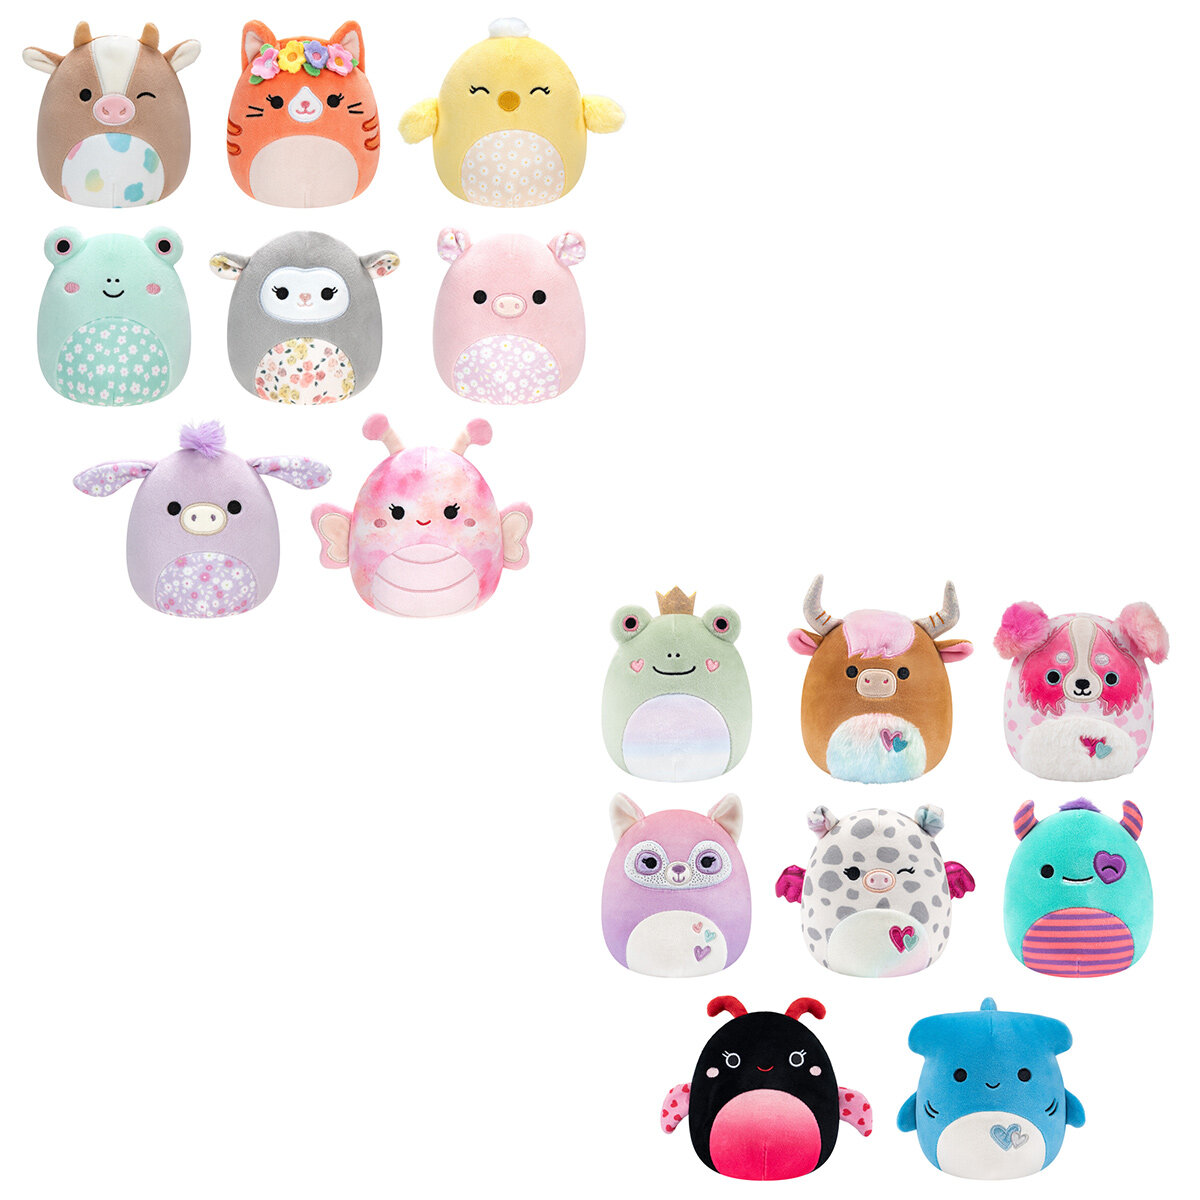 Squishmallows 5" (12.7cm) Plush Soft Toy Assortment 8 Pack (3+ Years)